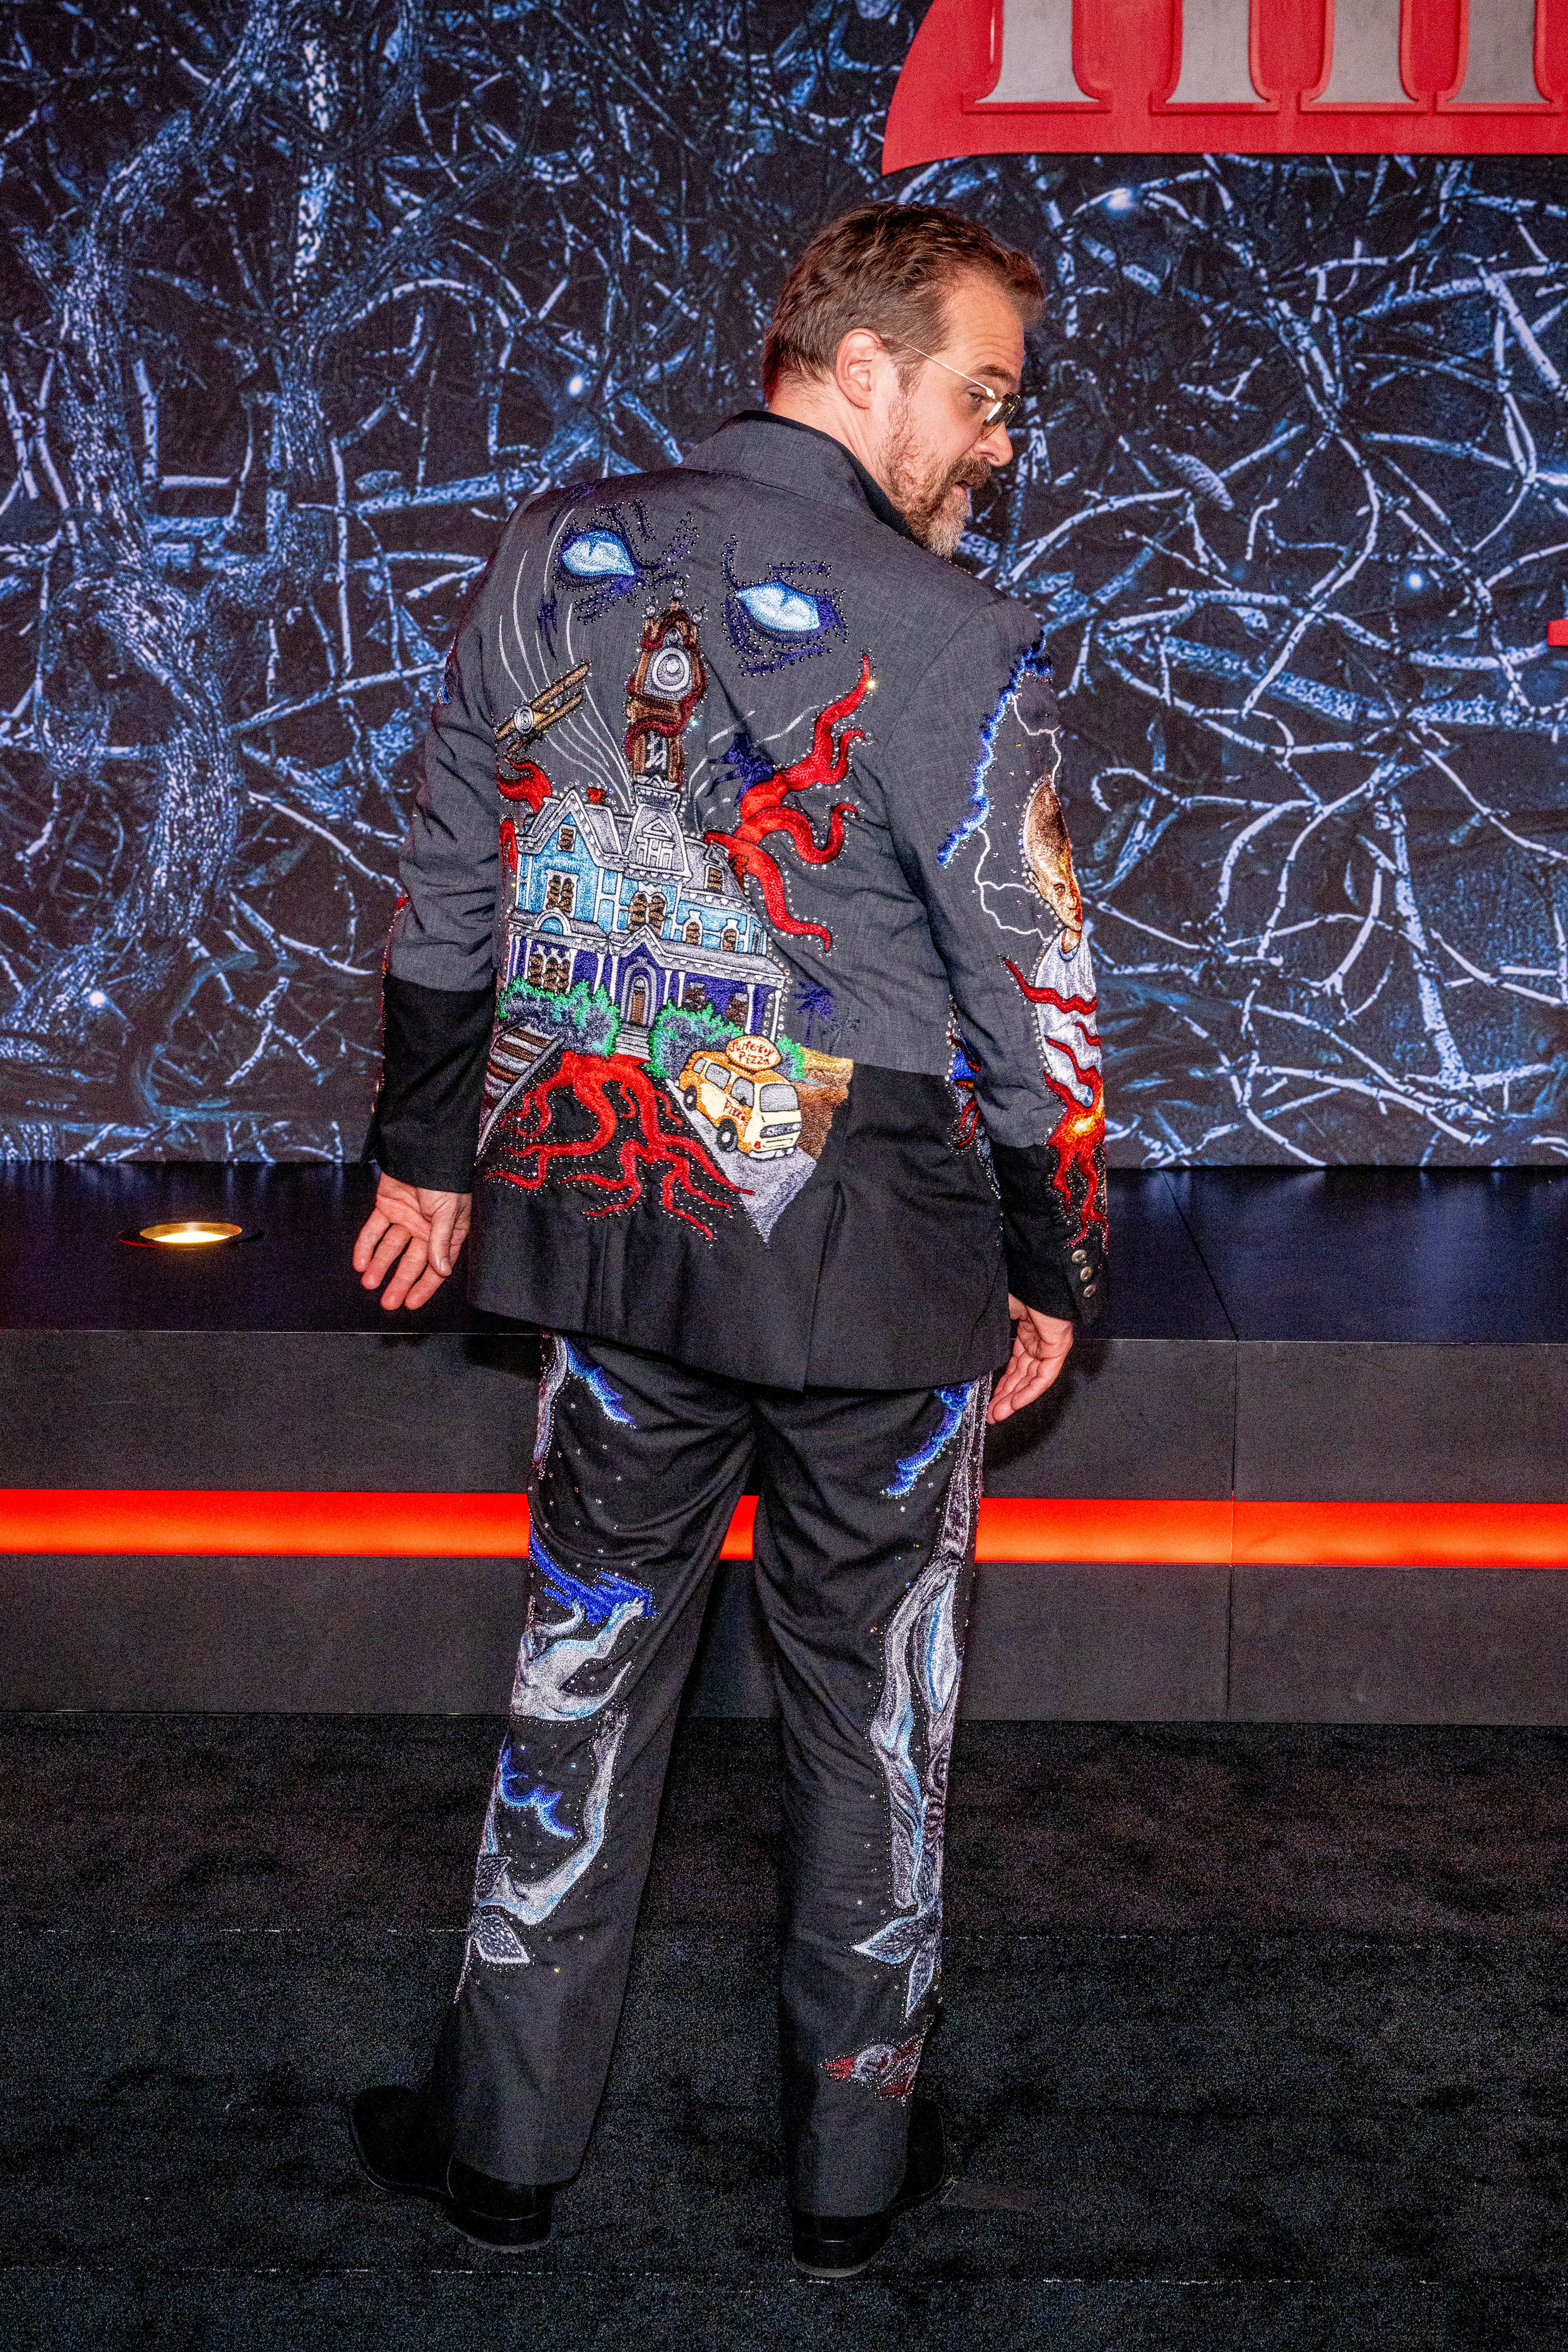 David turned around to show the back of the suit, which is covered with an artistic rendering of the main house from Stranger Things